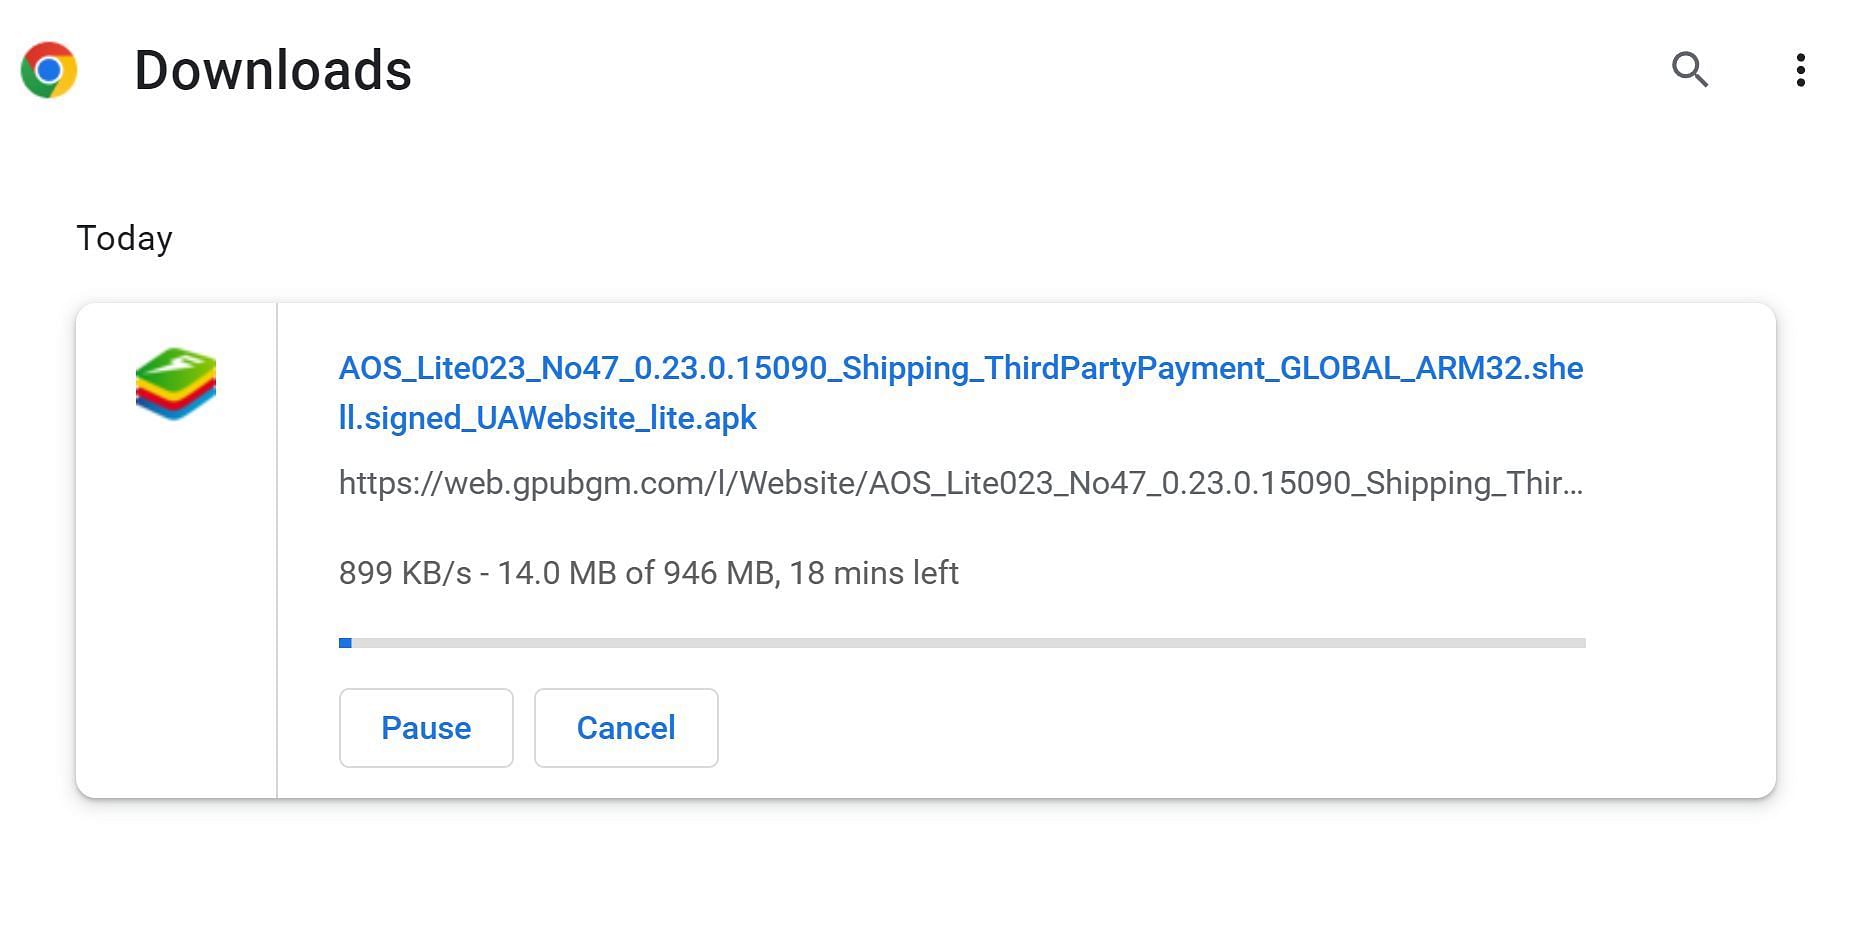 The APK file for the 0.23.0 update has a download size of 946 MB (Image via Google)